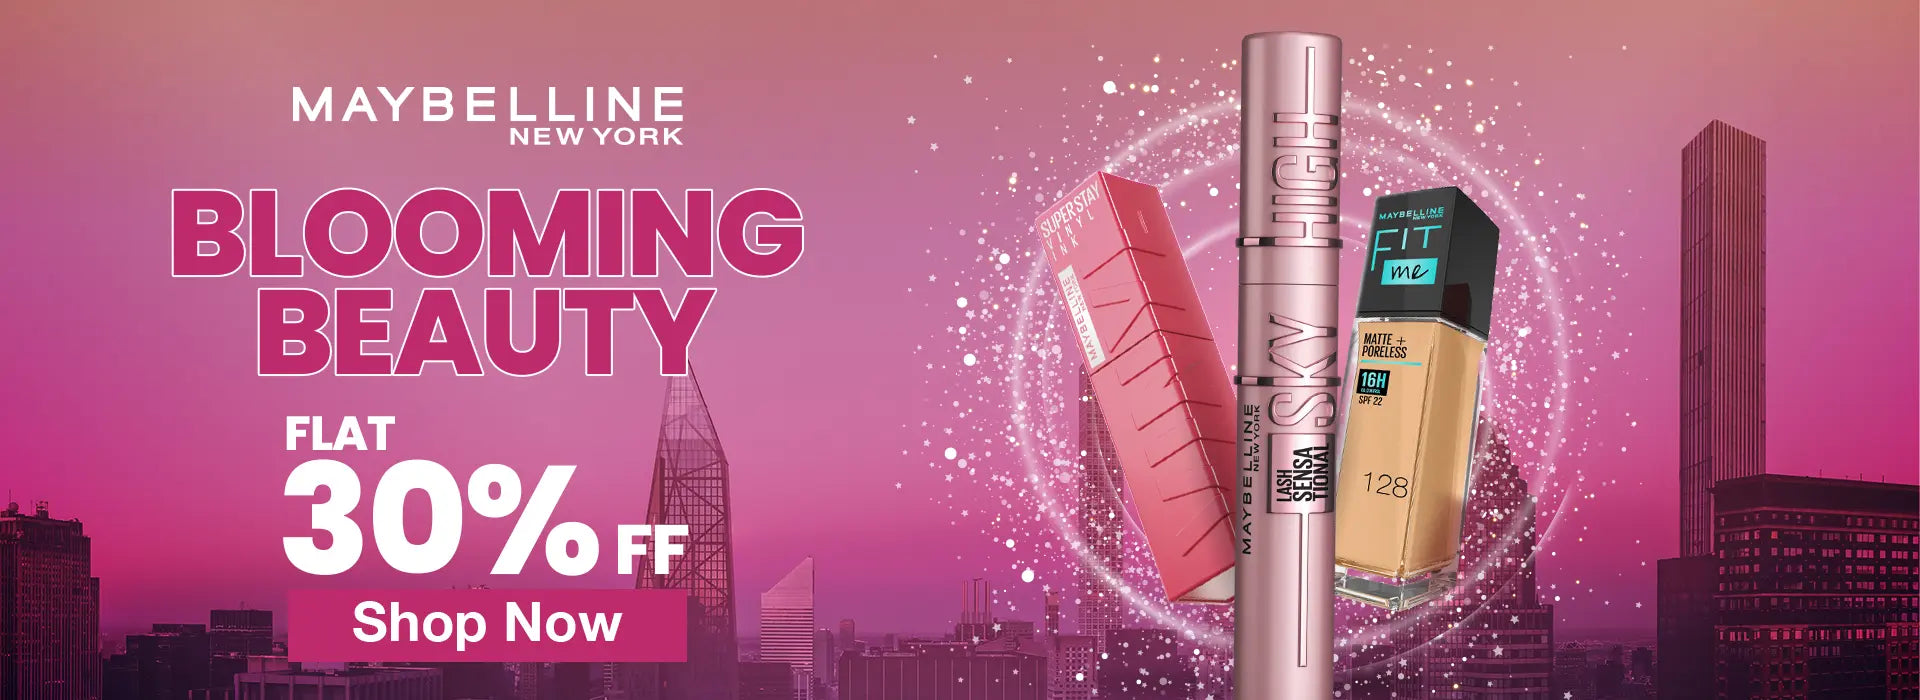 Maybelline | Flat 30% Off